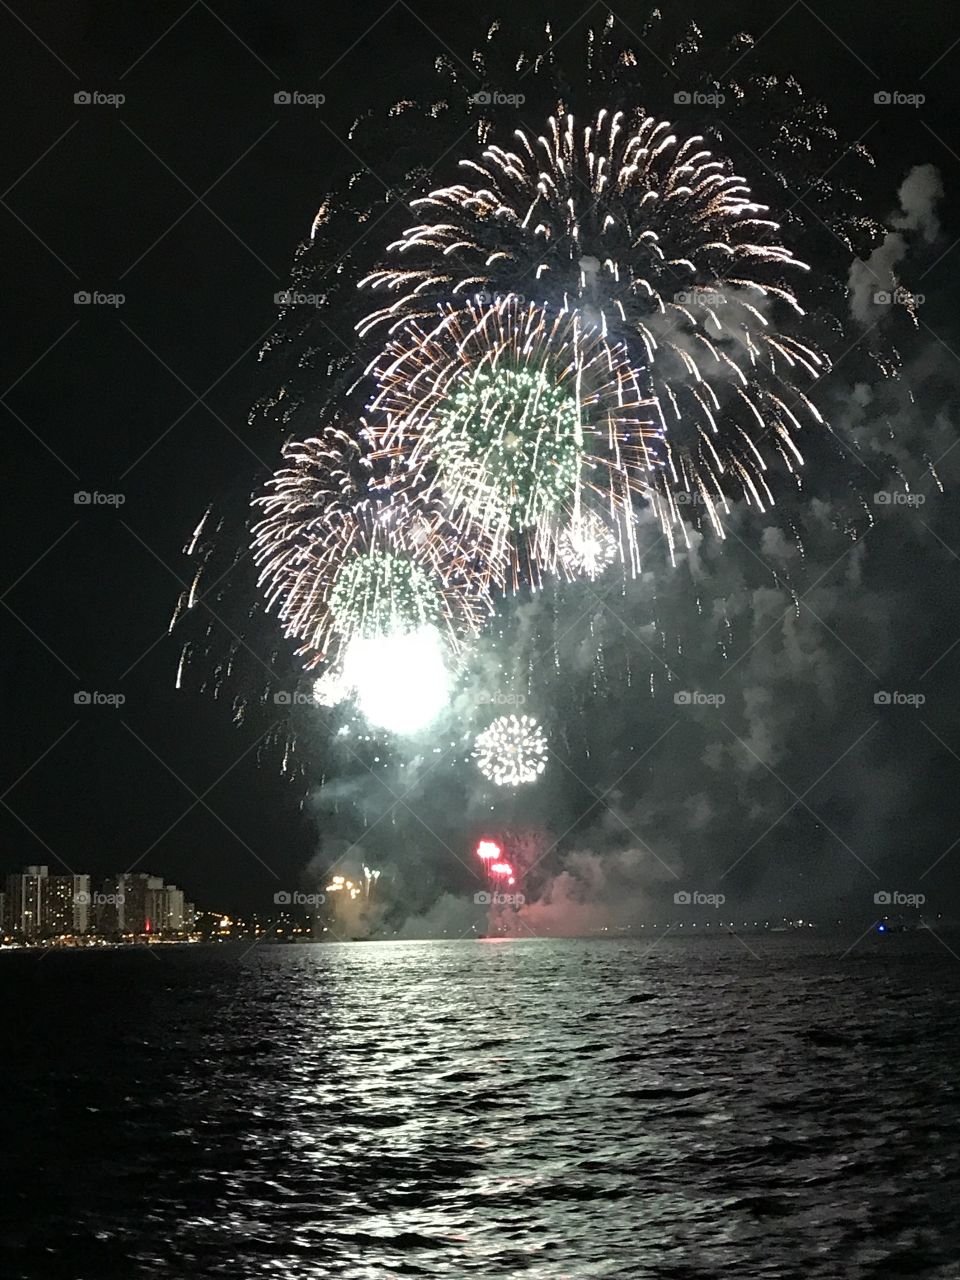 Hawaii Festival Fireworks at Night over the Ocean from out at sea! 